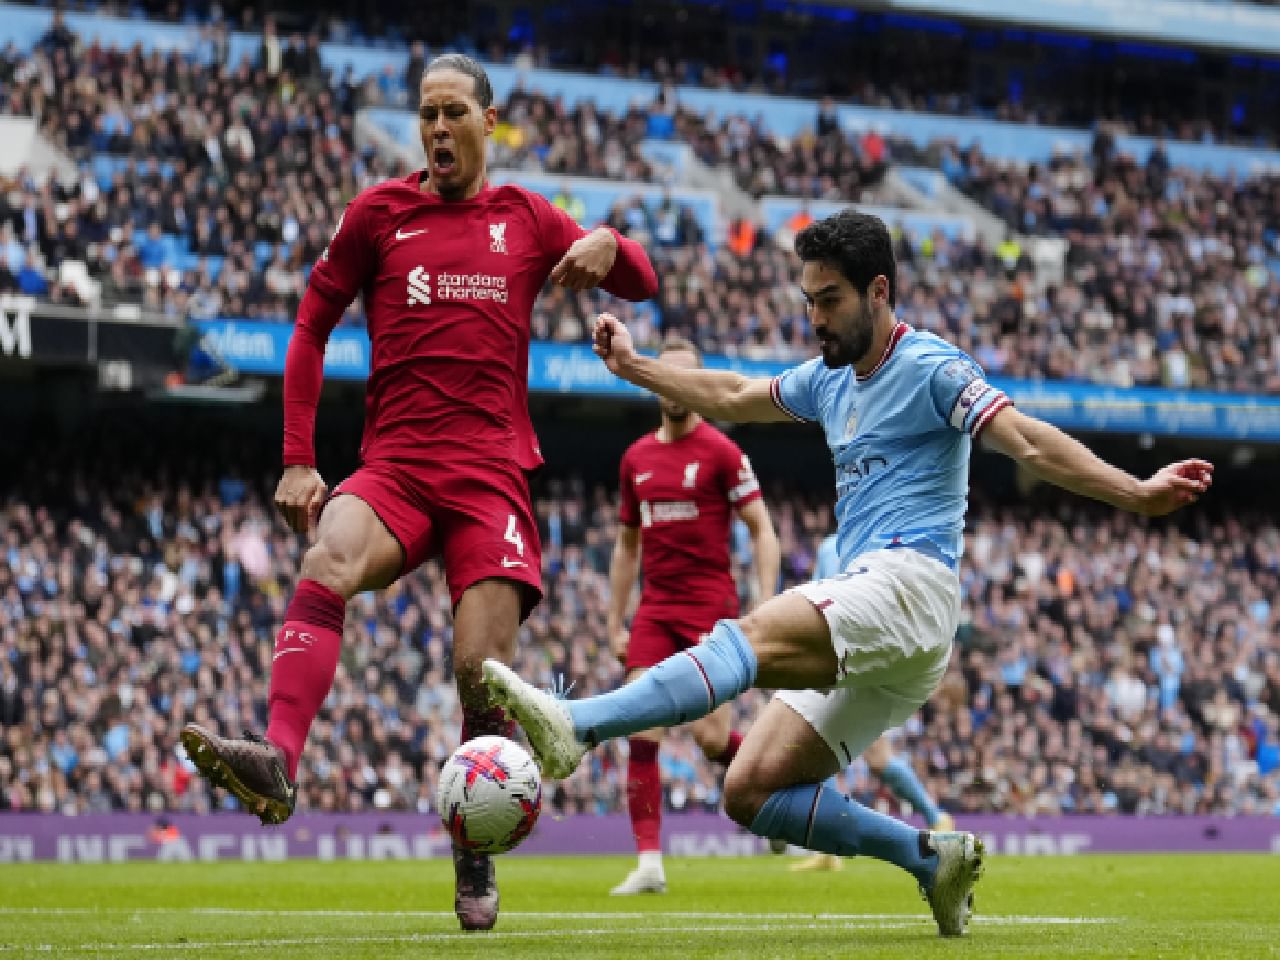 Guardiola’s intense affection may not be enough to prevent Gundogan’s exit from City